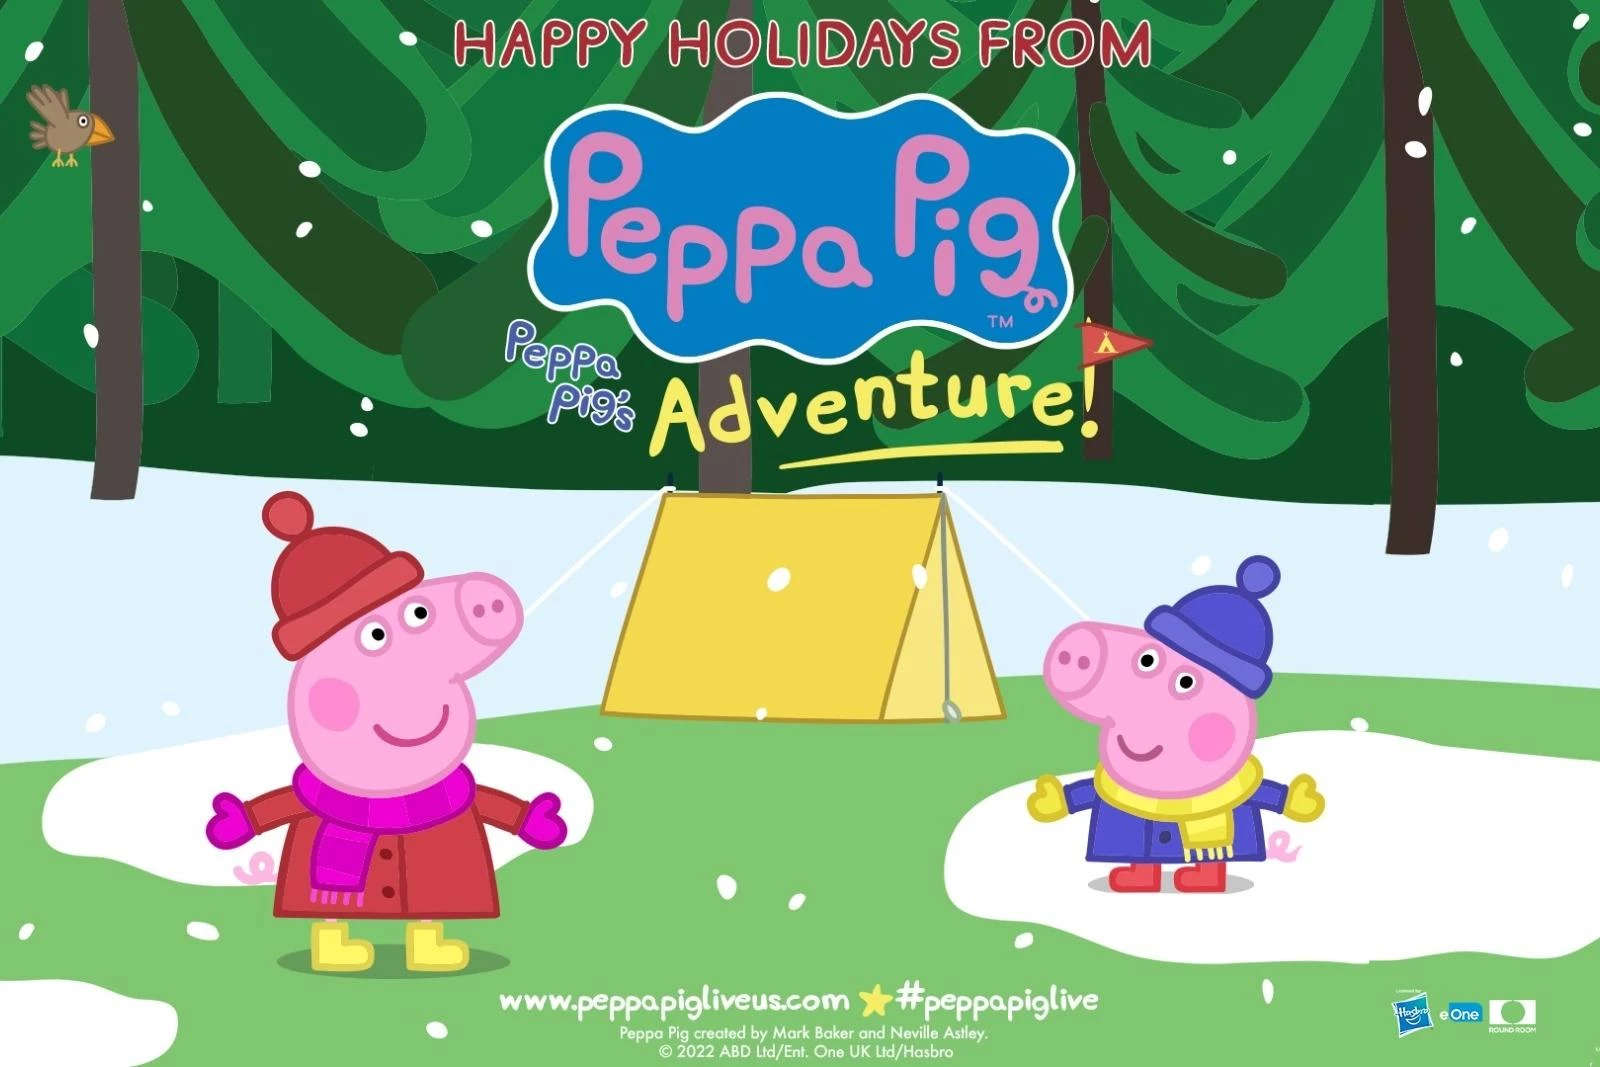 Photo by: Facebook / PeppaPigUSTour  